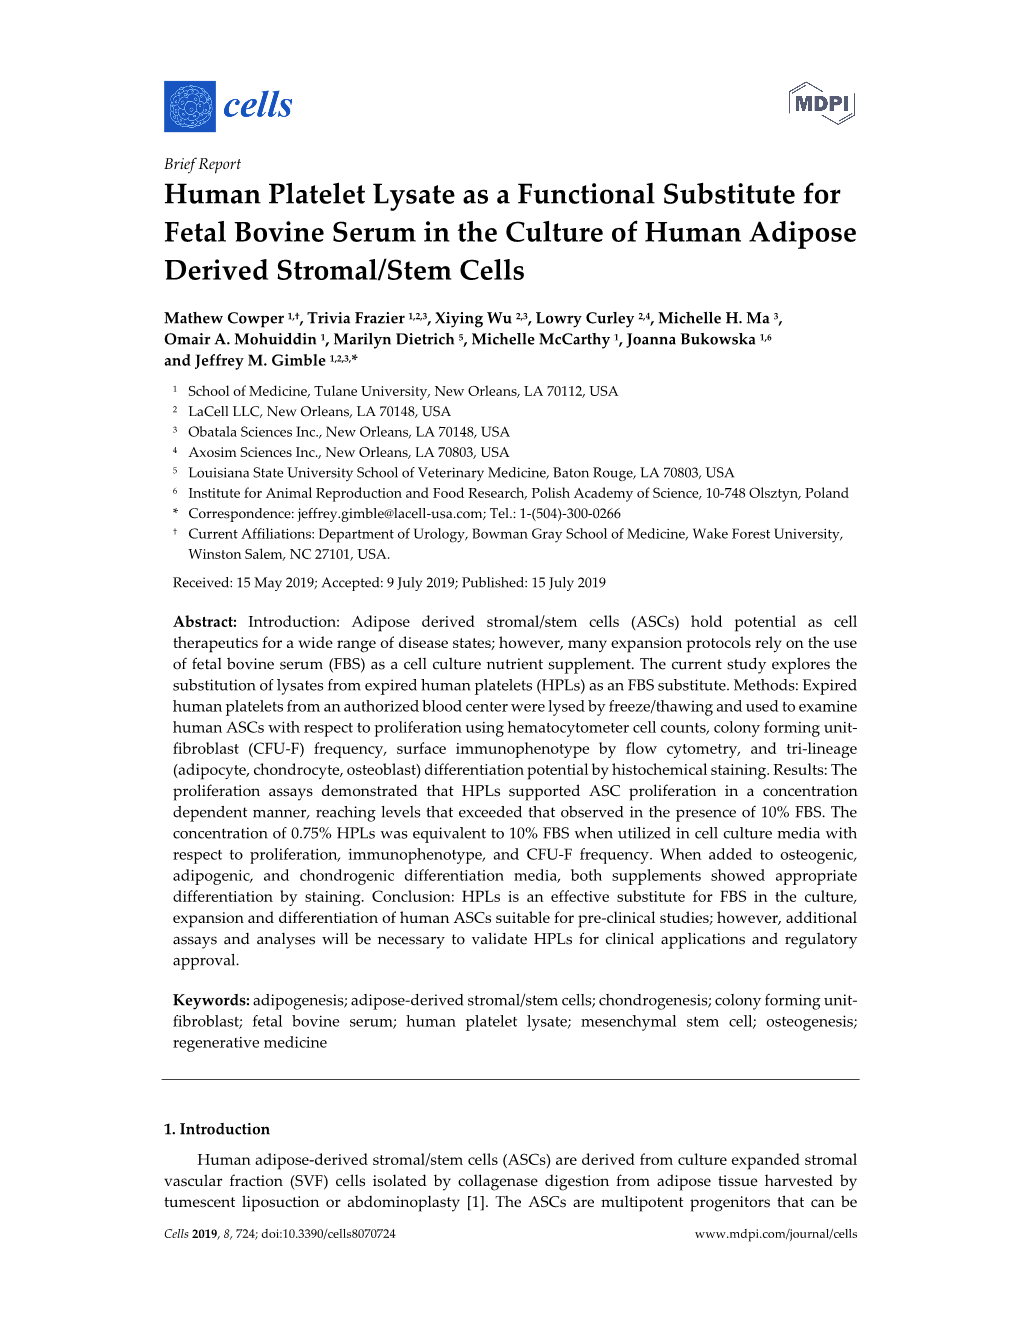 Human Platelet Lysate As a Functional Substitute for Fetal Bovine Serum in the Culture of Human Adipose Derived Stromal/Stem Cells